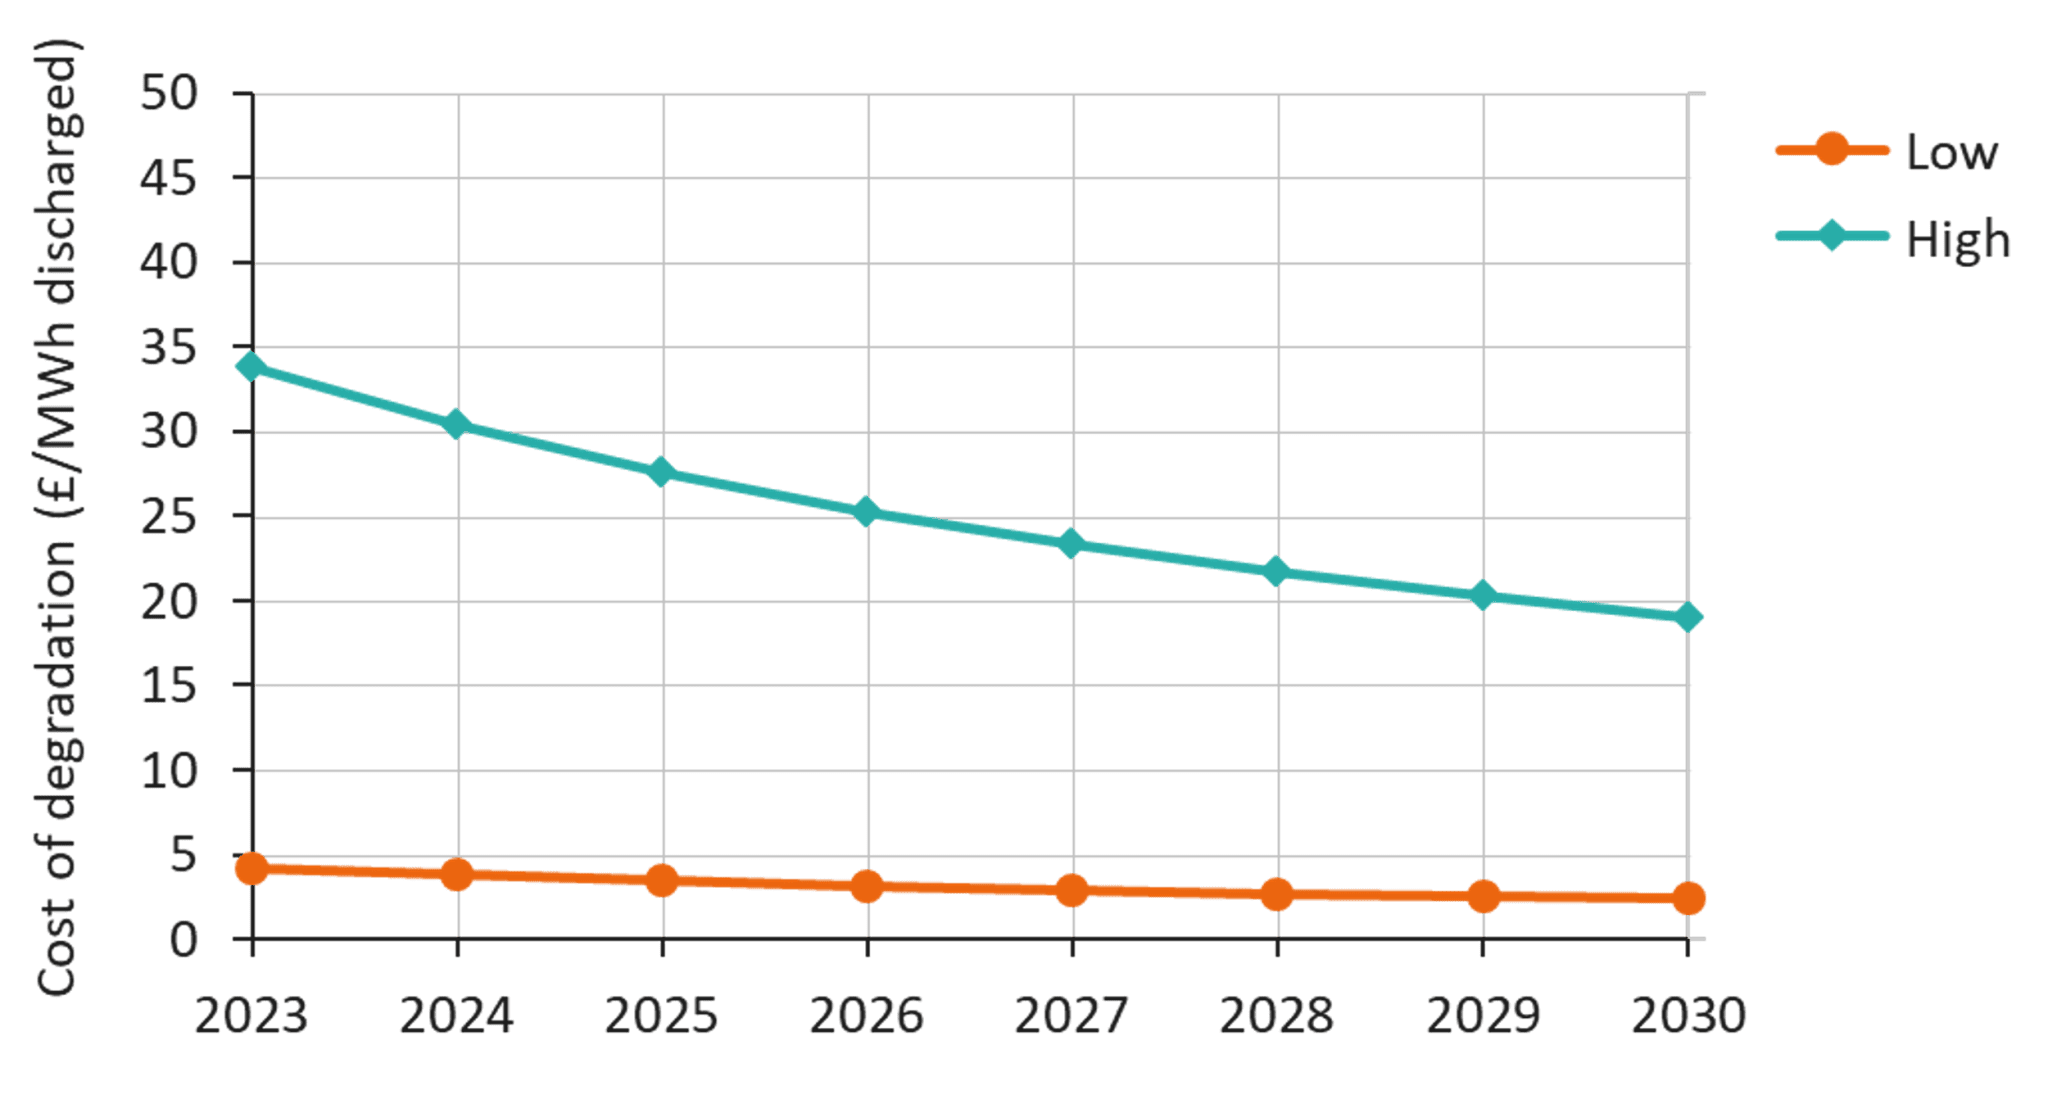 Chart showing the decrease in degradation costs for both a low (turquoise line) and high scenario (orange line). The high-cost scenario decreases from about 35 pounds per mega-watt-hour discharged in 2023 to about 20 pounds per mega-watt-hour discharged in 2030. The low-cost scenario decreases from about 5 pounds per mega-watt-hour discharged in 2023 to about 2.5 pounds per mega-watt-hour discharged in 2030.